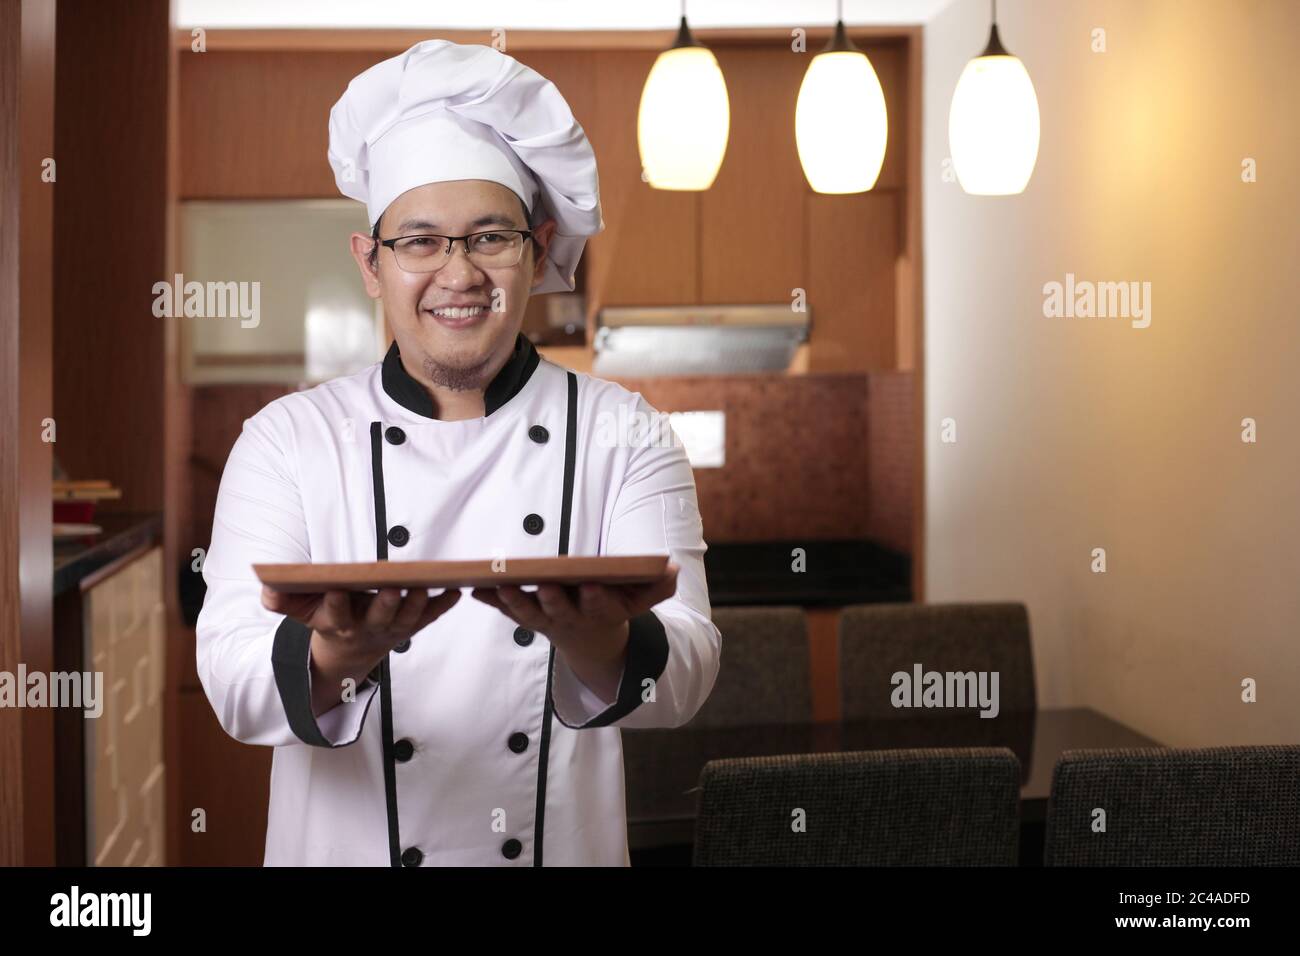 https://c8.alamy.com/comp/2C4ADFD/portrait-of-asian-male-chef-looks-happy-and-proud-presenting-something-on-his-empty-wooden-plate-copy-space-meal-menu-concept-2C4ADFD.jpg